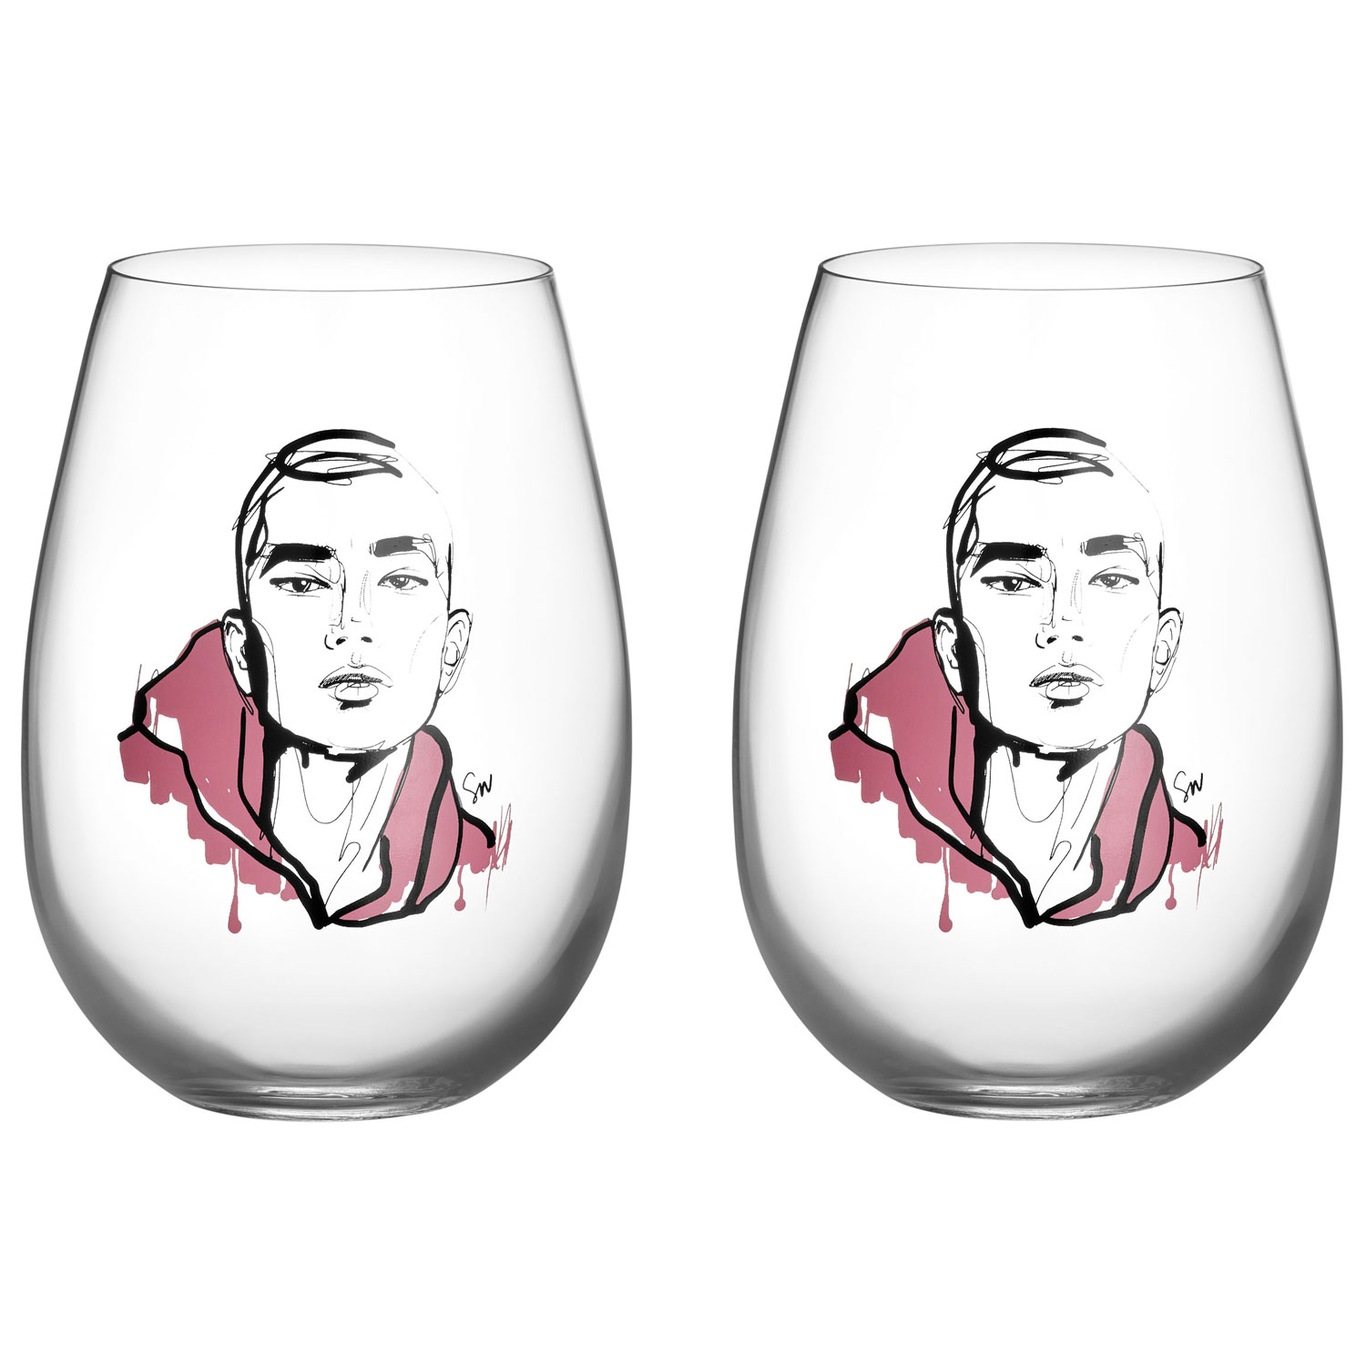 All About You Tumblerglass 57 cl 2-pk, Close To Him